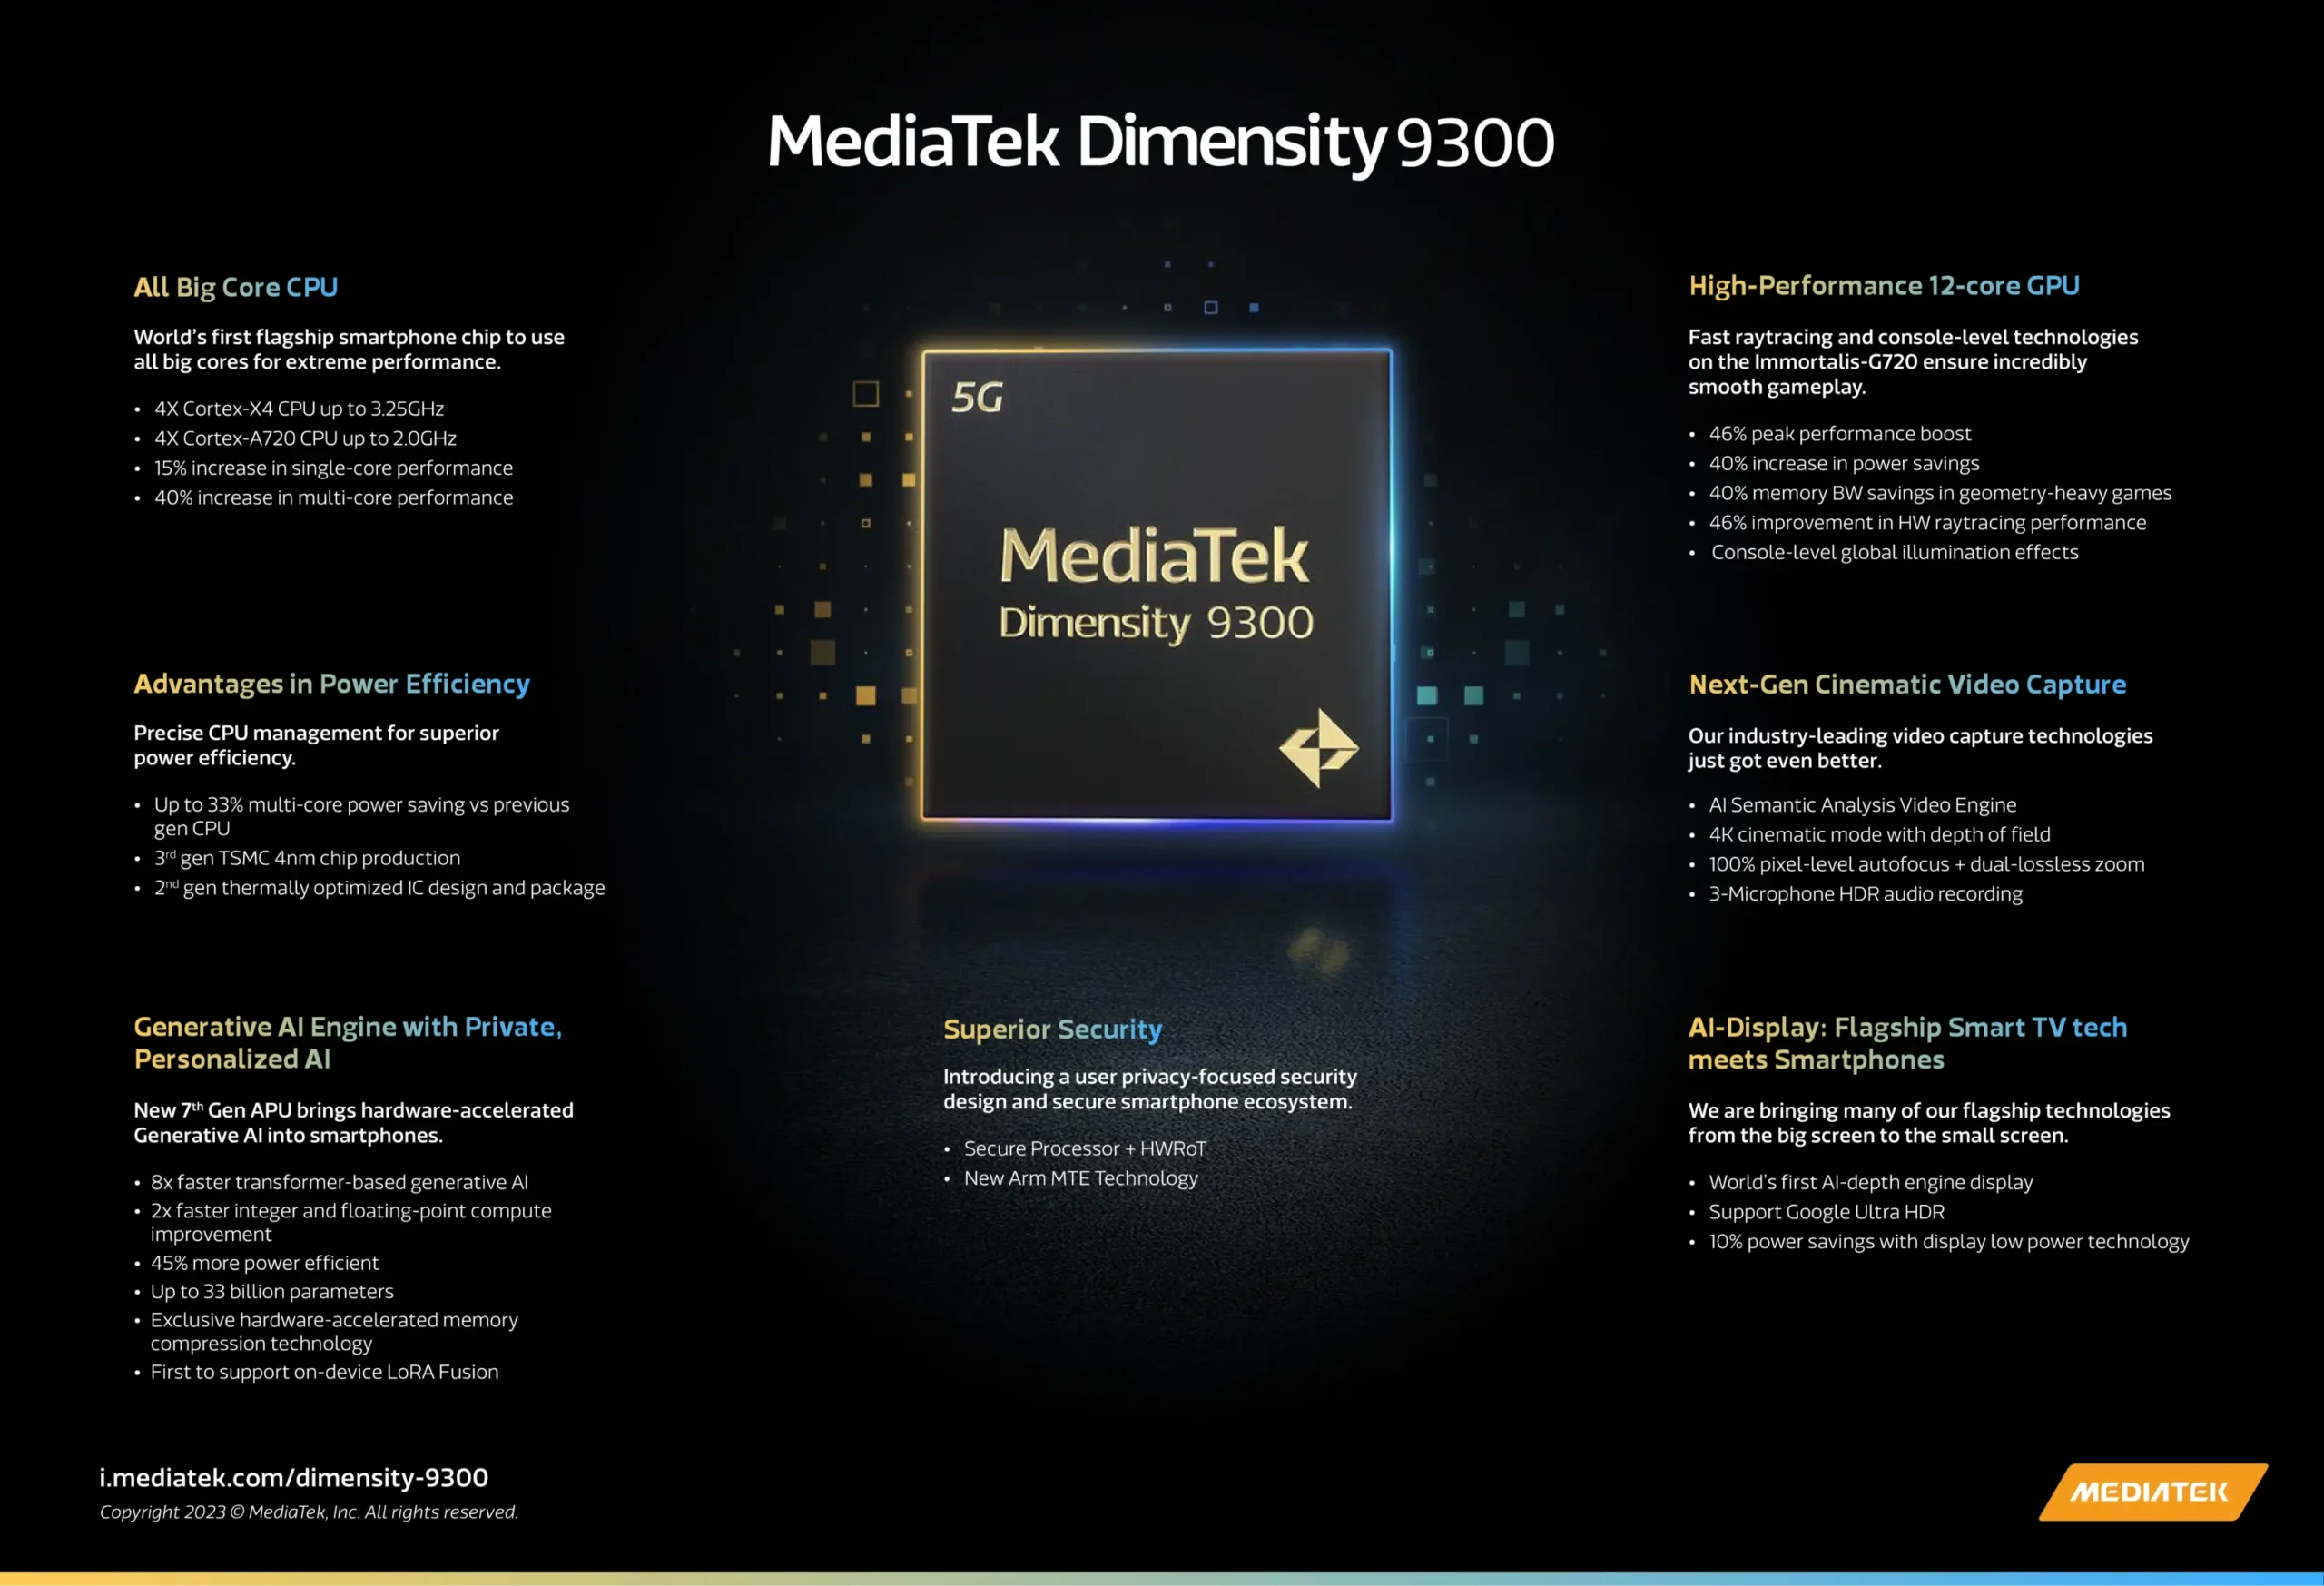 MediaTek's Dimensity 9300 Loses 46 Percent Of Its Performance Due To  Throttling In New Stress Test As Vivo X100 Pro's Vapor Chamber Submits